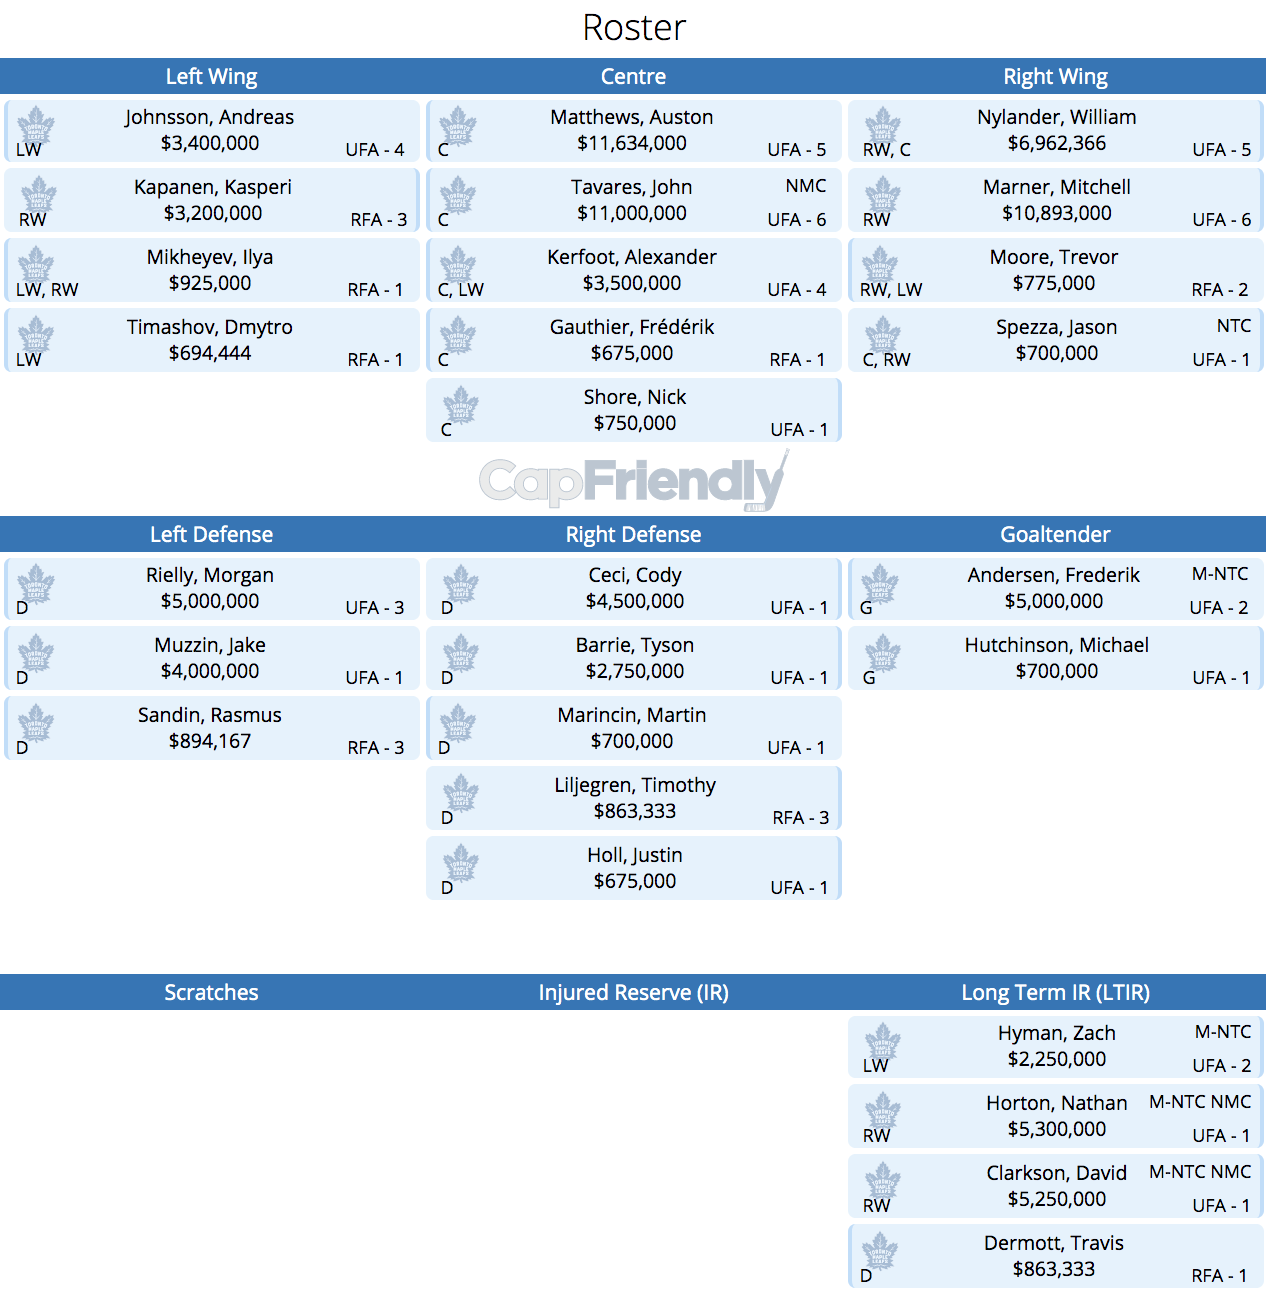 Toronto Maple Leafs' Roster